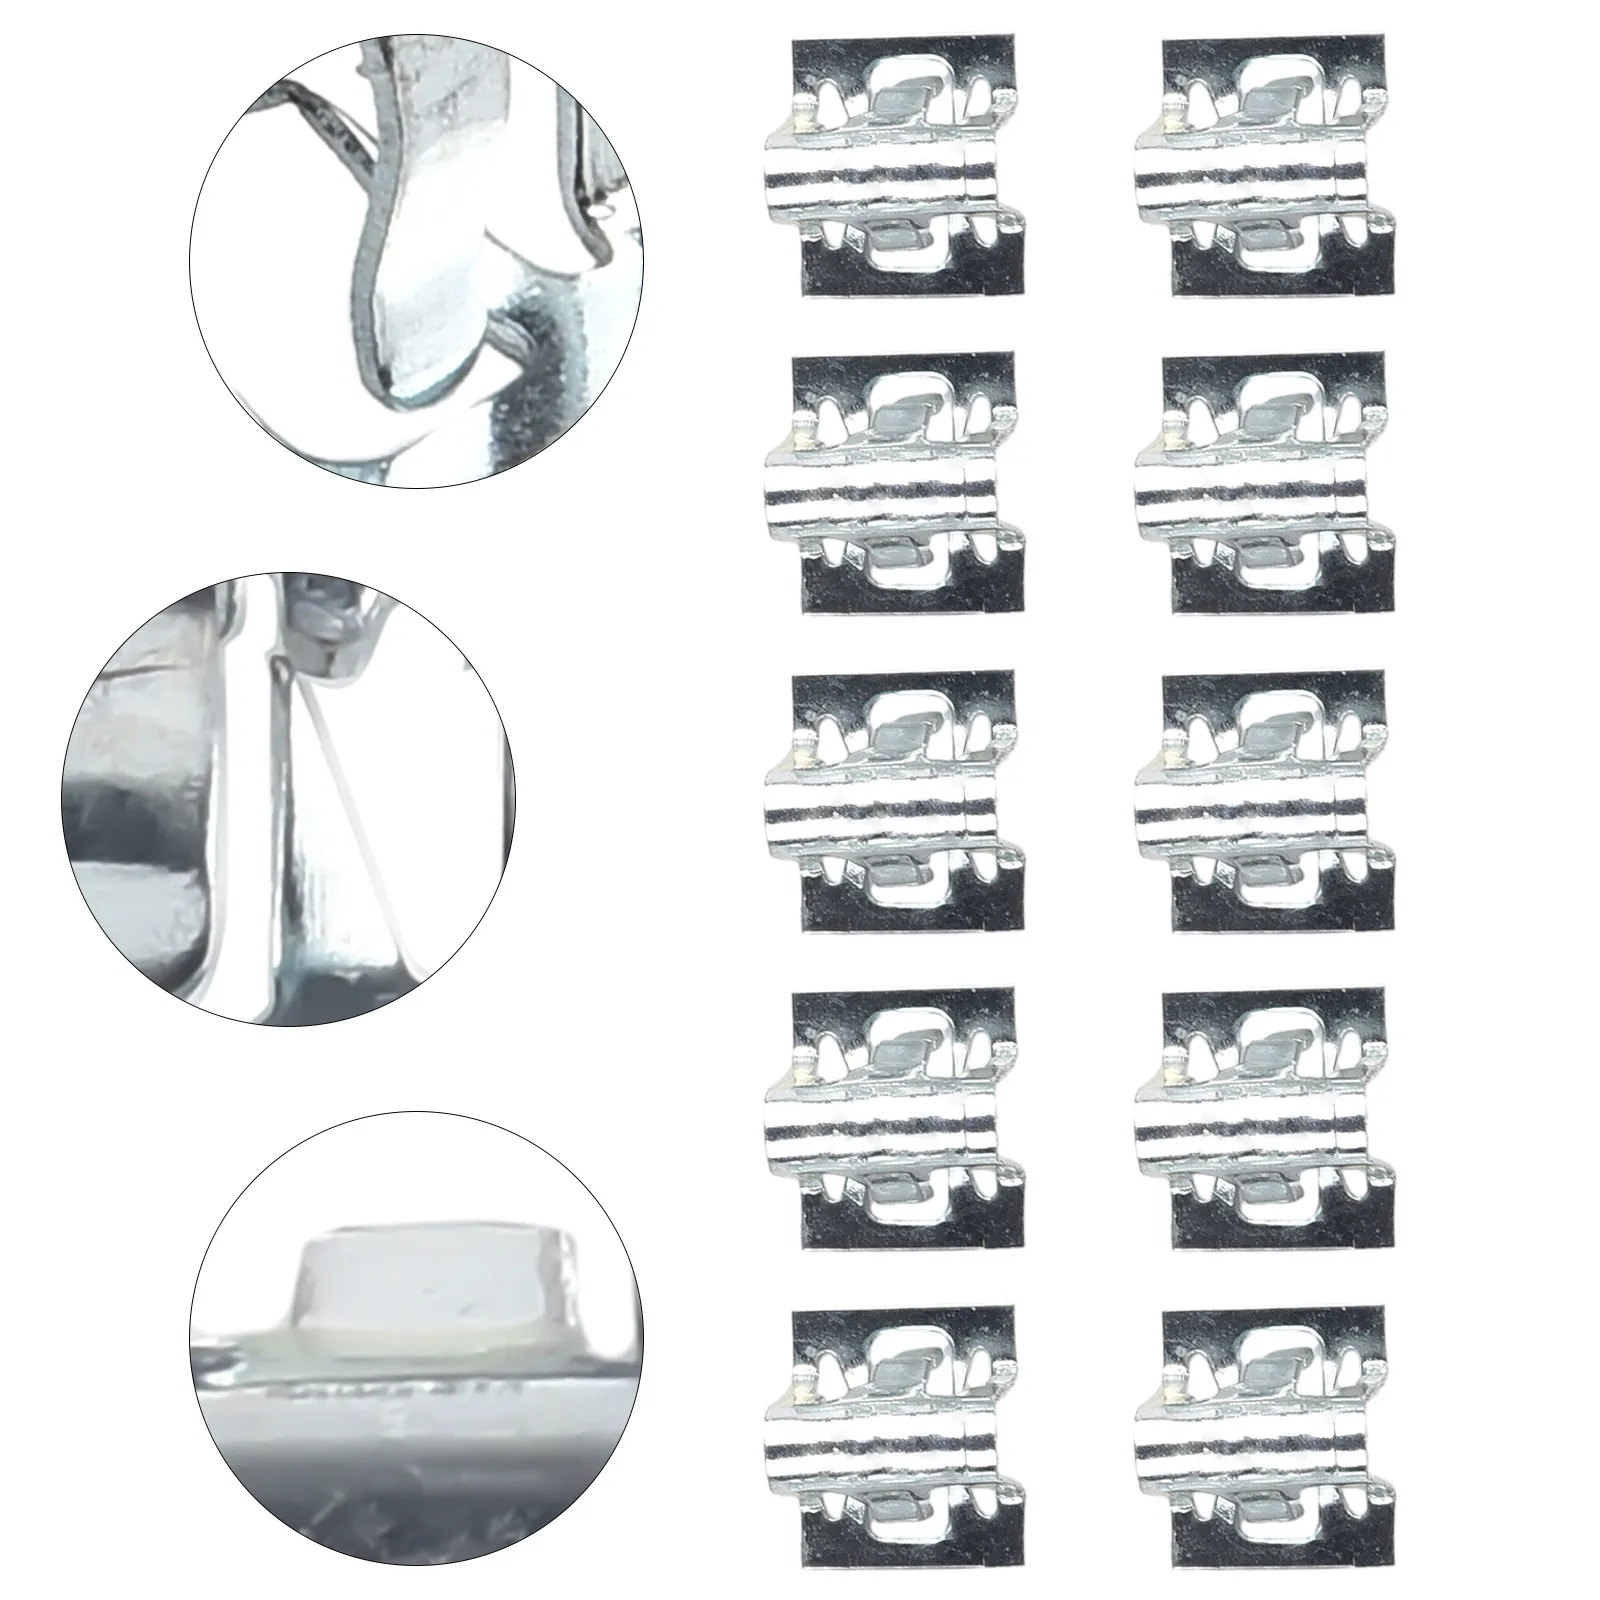 

Car Retainer Clip Metal Clips Car Fasteners And Clips Car Interior Parts Fixed Clip Metal Panel Plate Silver None